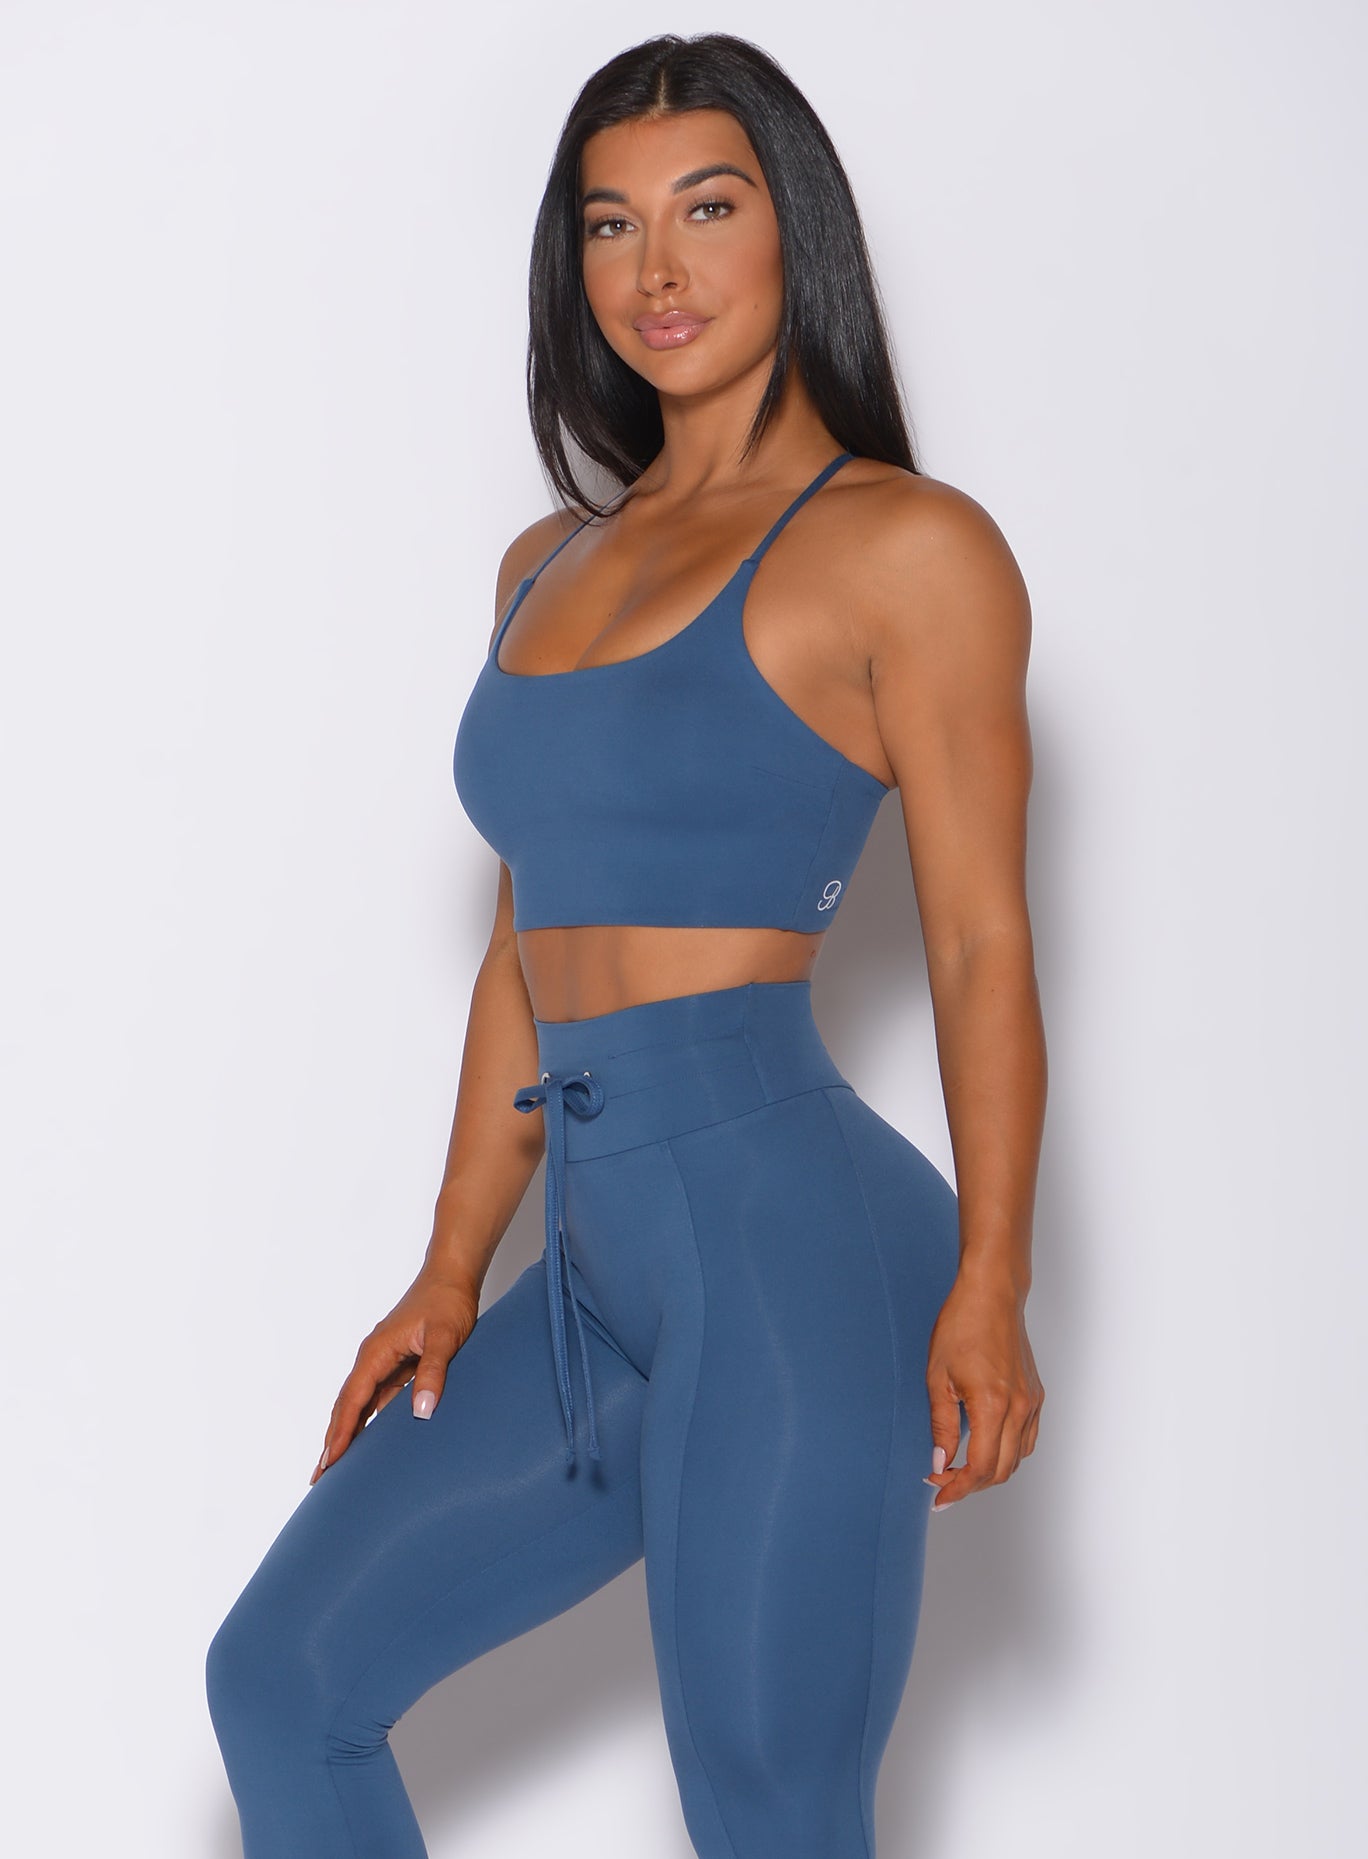 Left side profile view of a model angled left wearing our cross fit sports bra in cool water color and a matching leggings